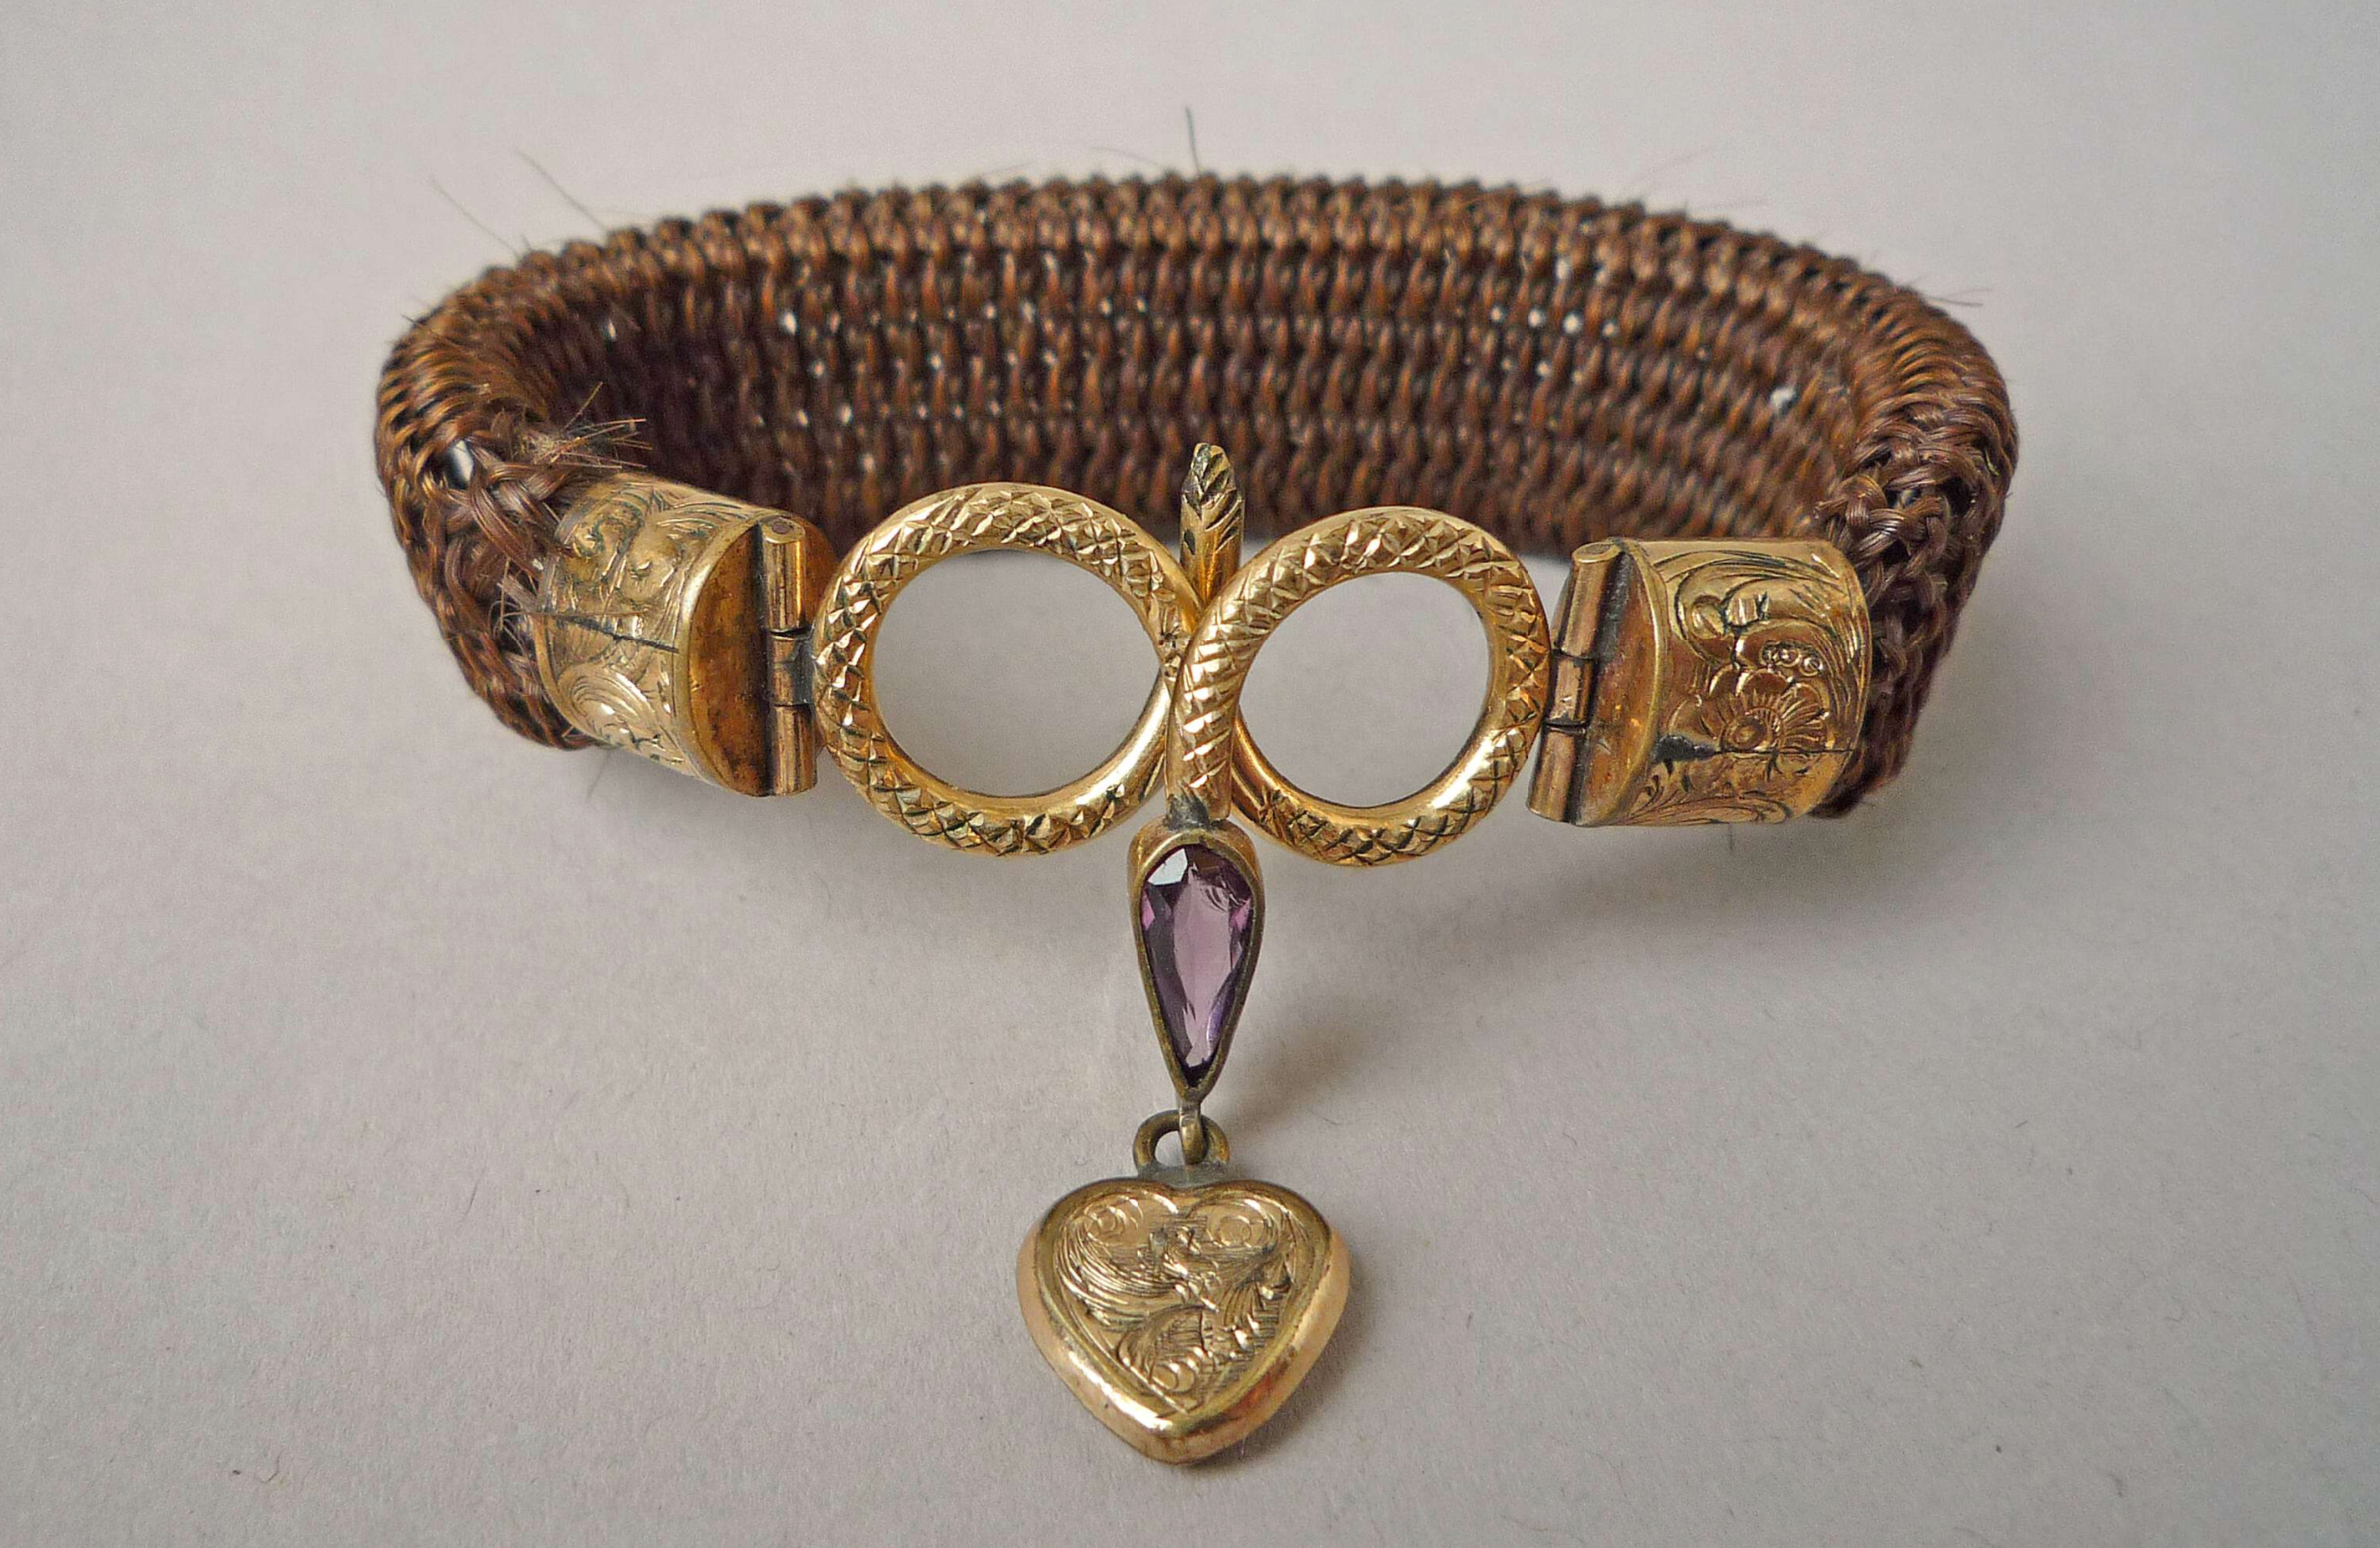 Bracelet of flat plaited hair with engraved gold ends and coiled gold serpent clasp with amethyst drop and small pendant gold heart, thought to be the work of Antoni Forrer, c1850-1870, British Museum